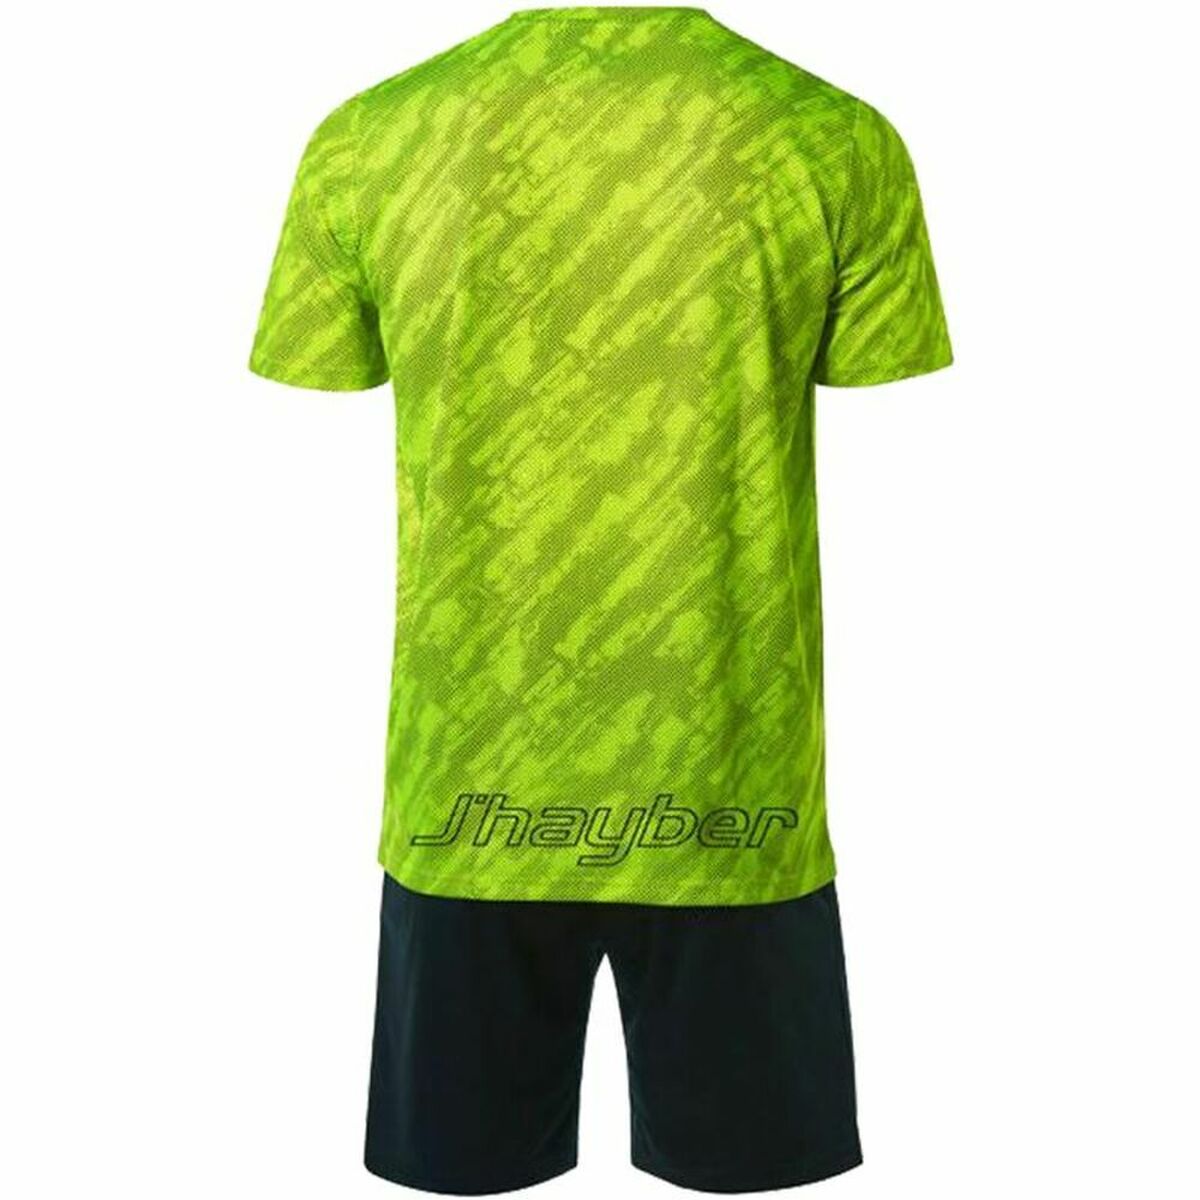 Adult's Sports Outfit J-Hayber Yellow